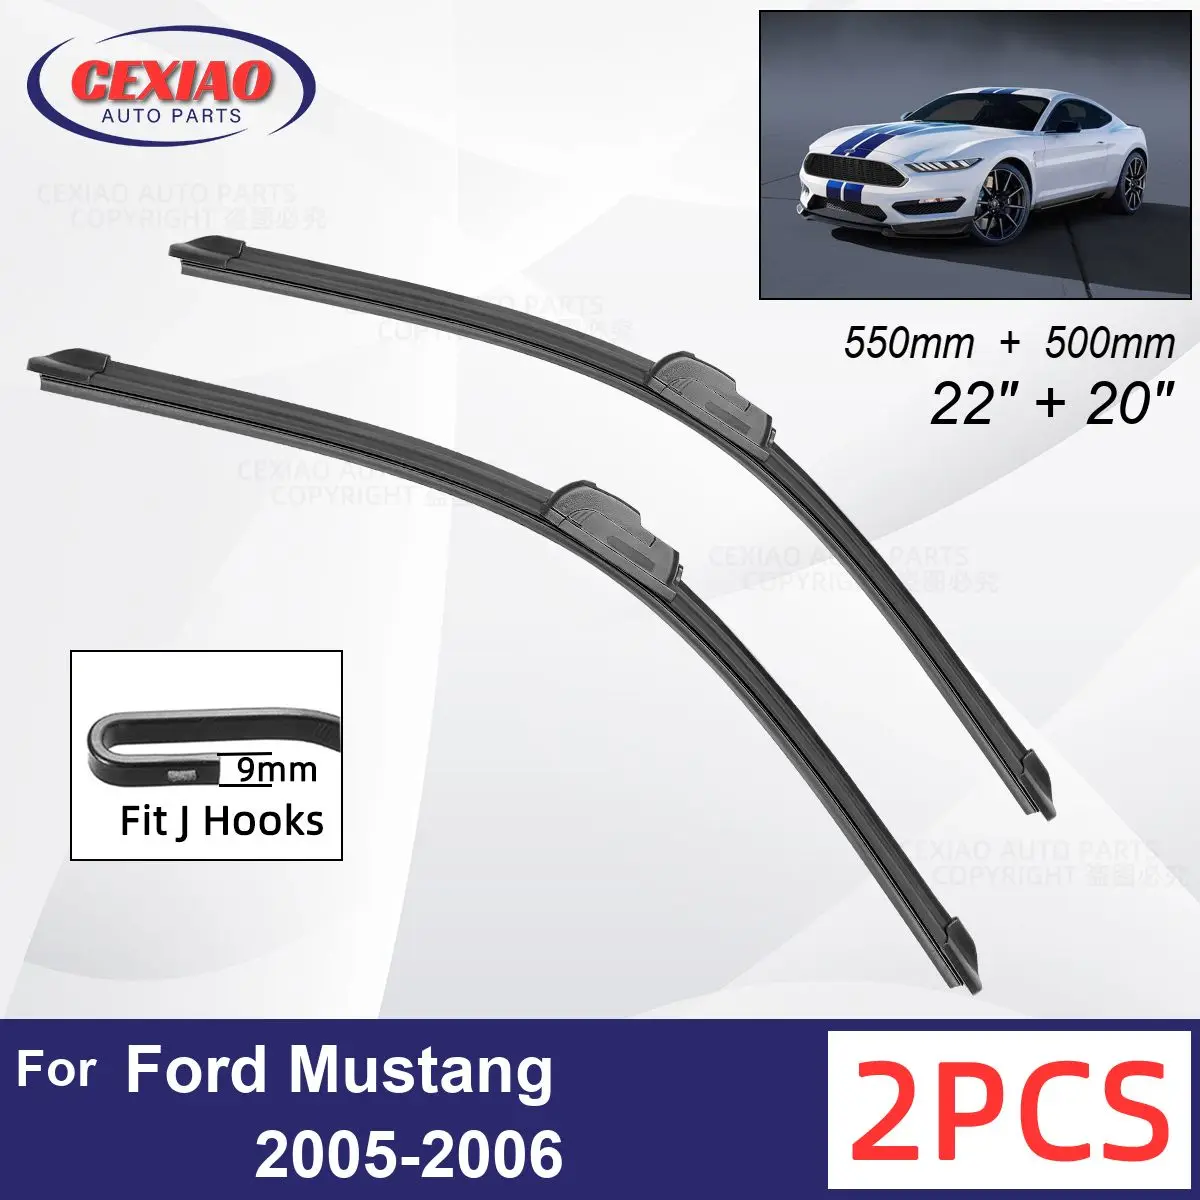 

Car Wiper For Ford Mustang 2005-2006 Front Wiper Blades Soft Rubber Windscreen Wipers Auto Windshield 22" 20" 550mm 500mm